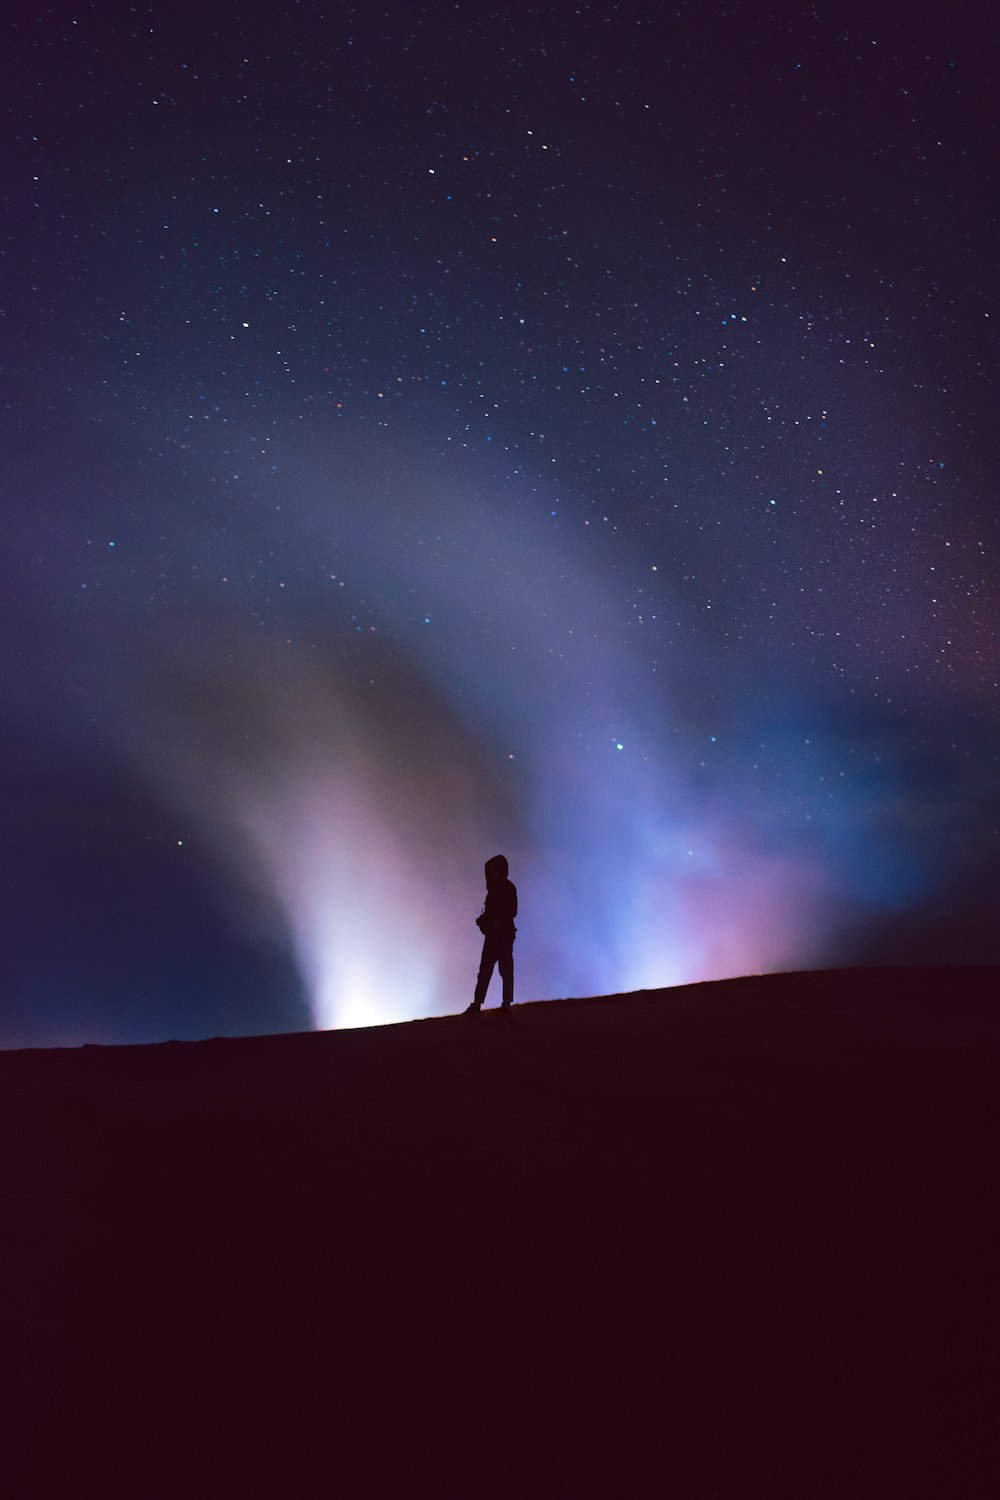 a person standing on top of a hill under a night sky